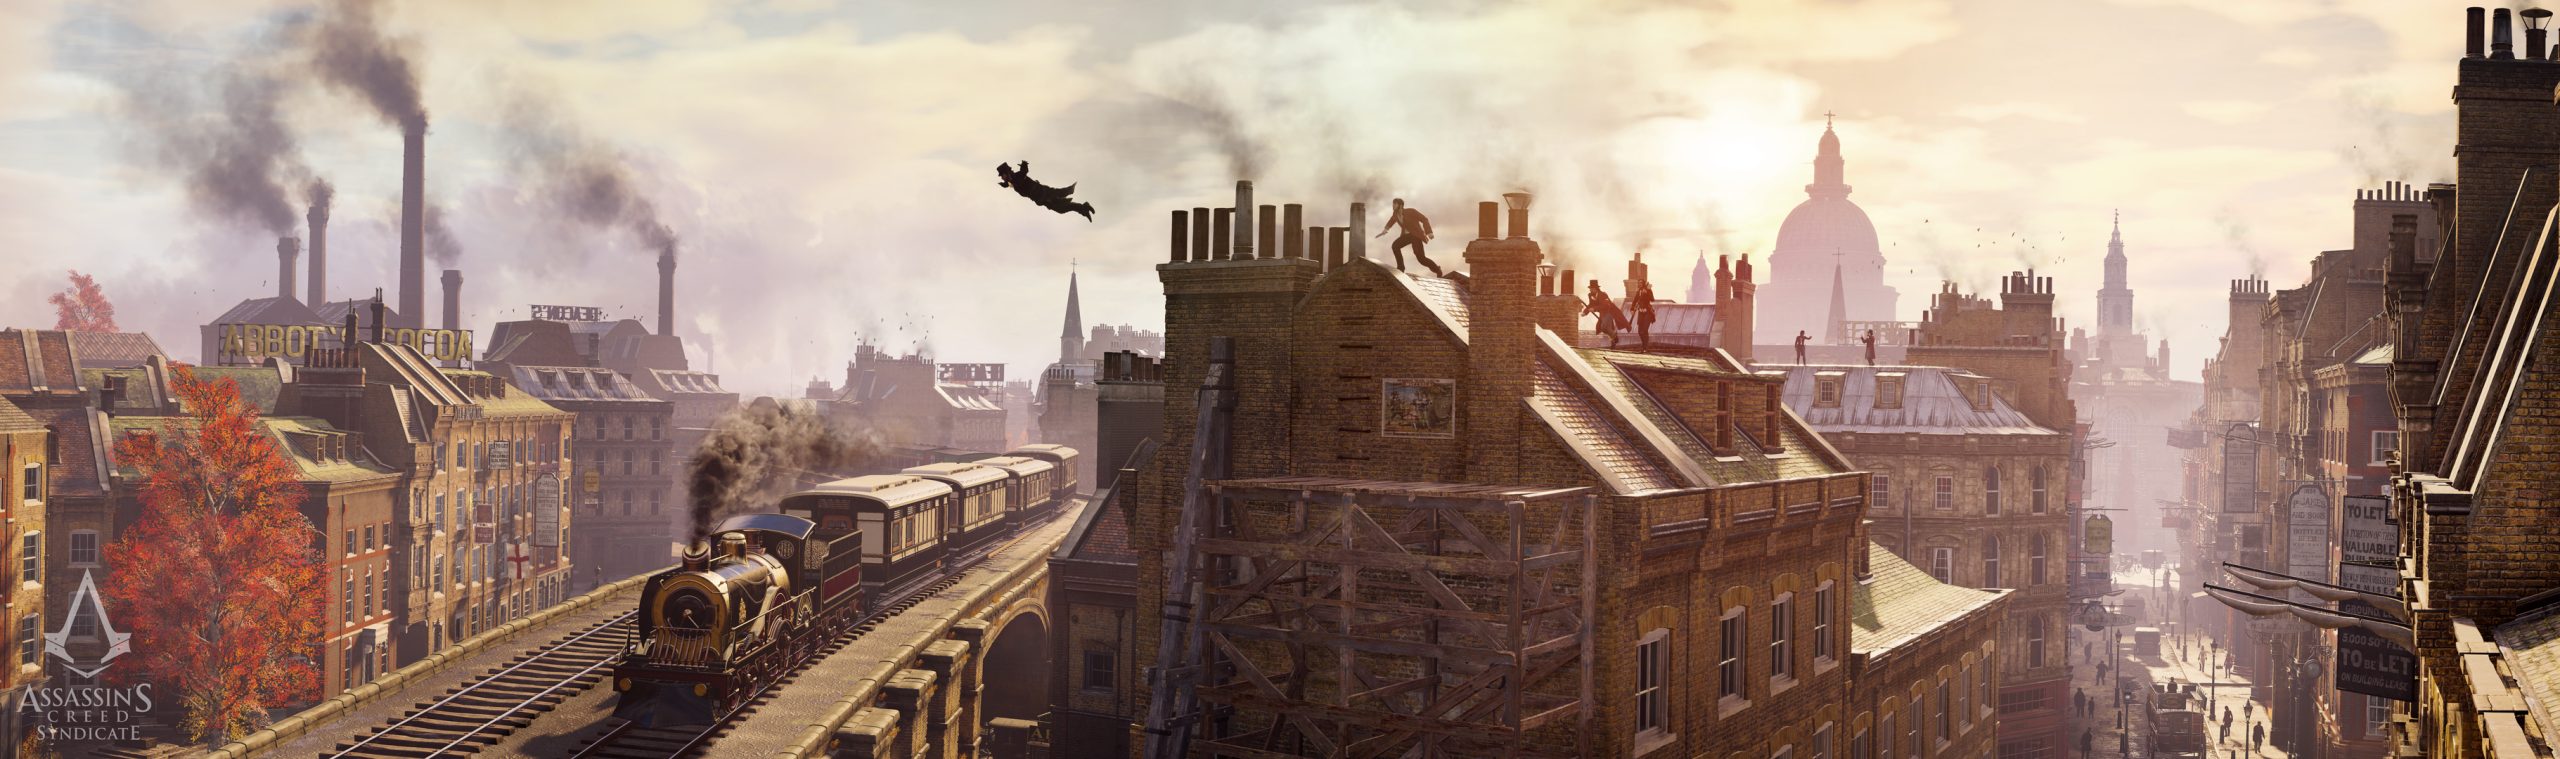 Assassin’s Creed Syndicate Review: All Eyes on the Fryes